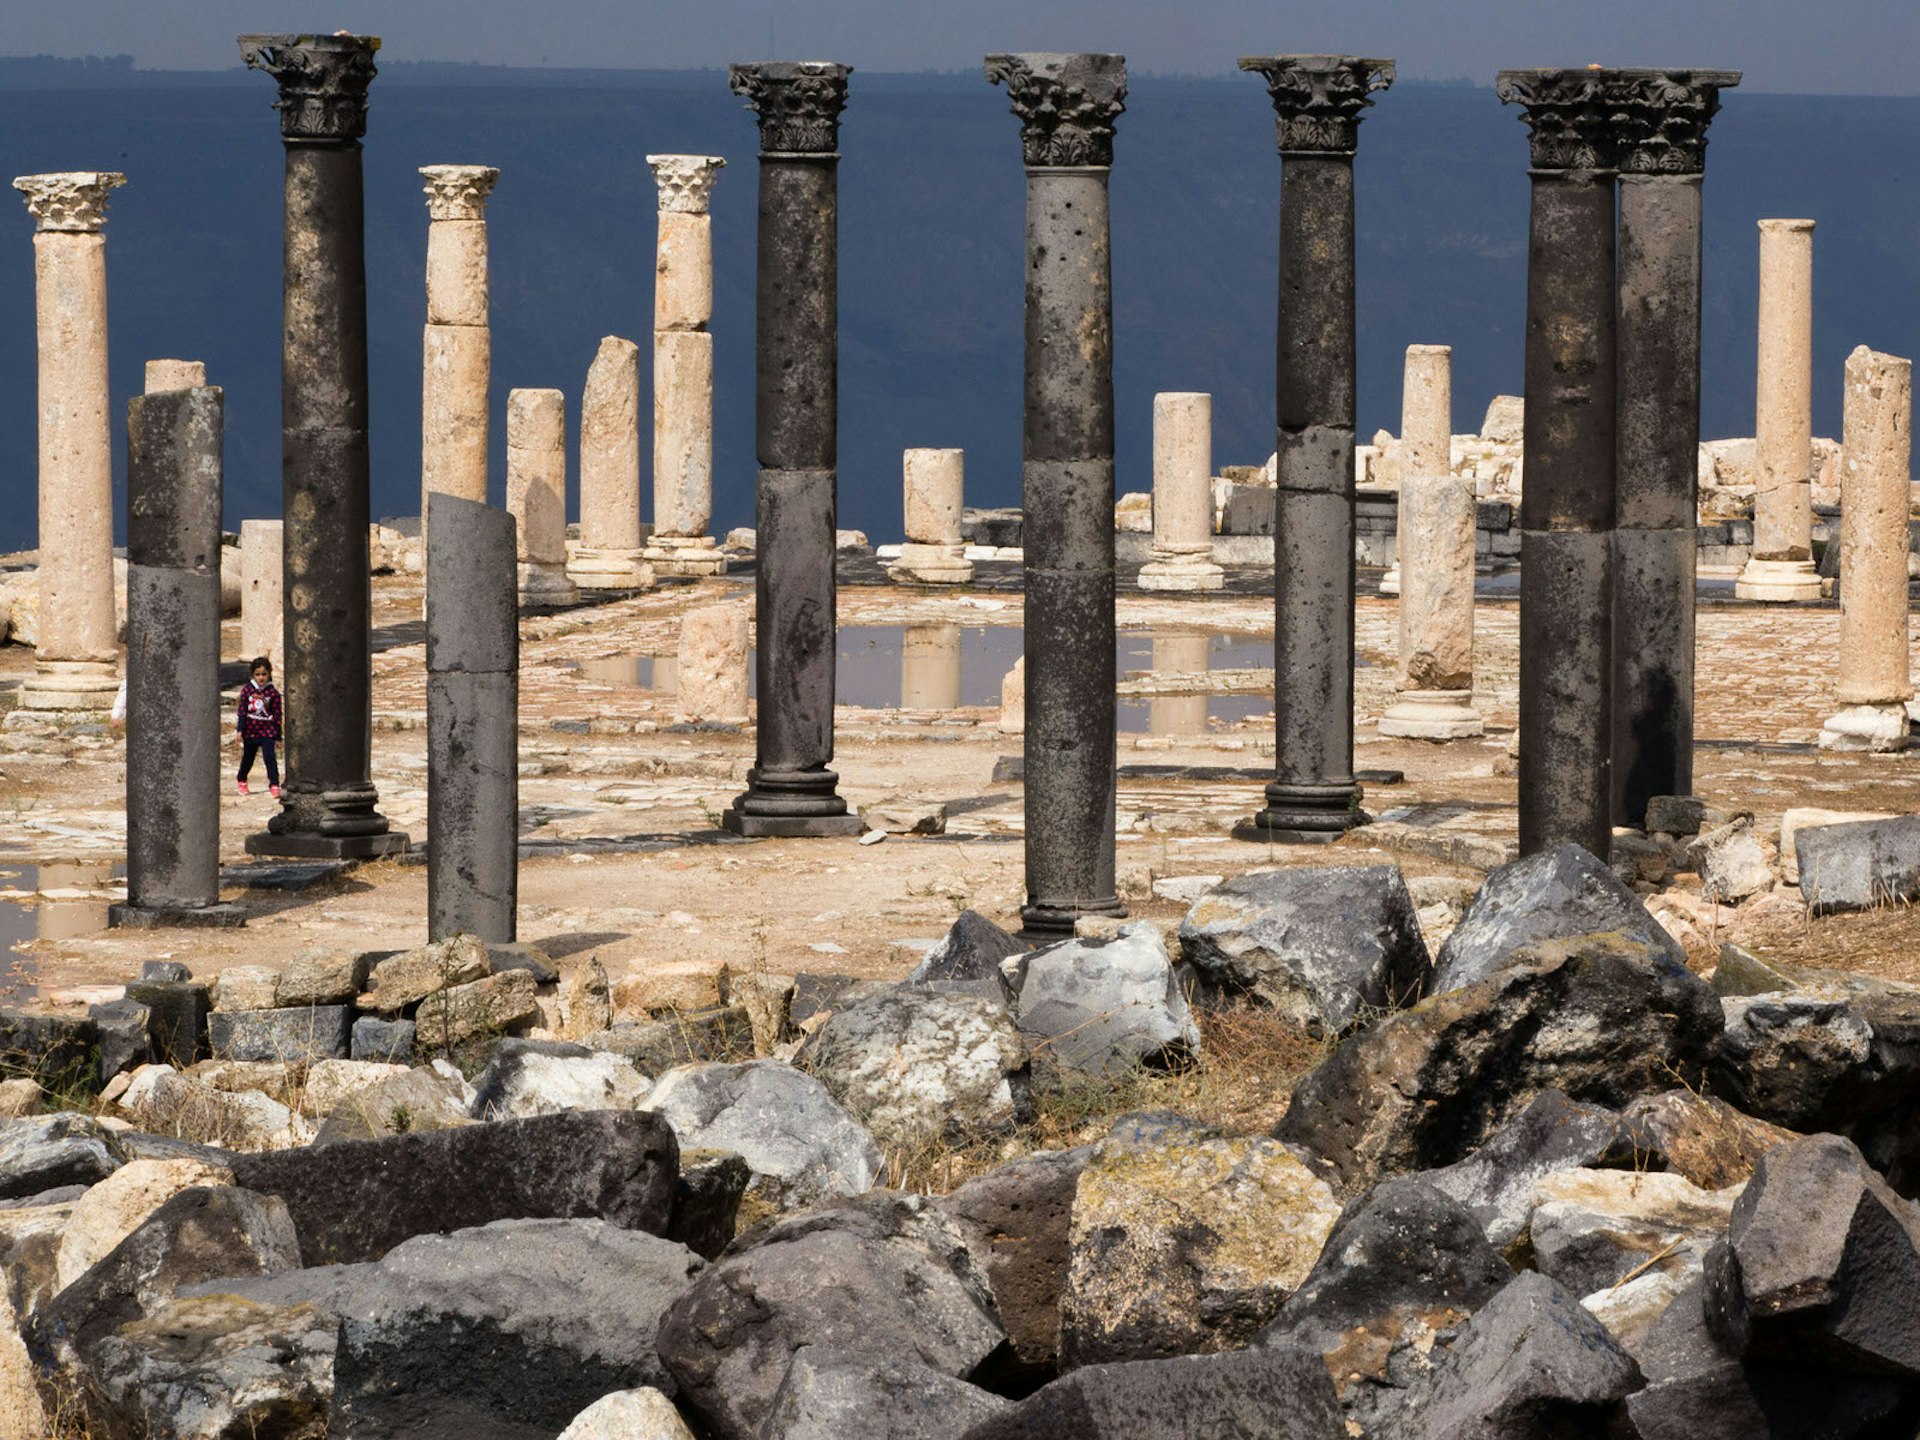 The columns of the Umm Qais ruins in Jordan © Stephen Lioy / Lonely Planet